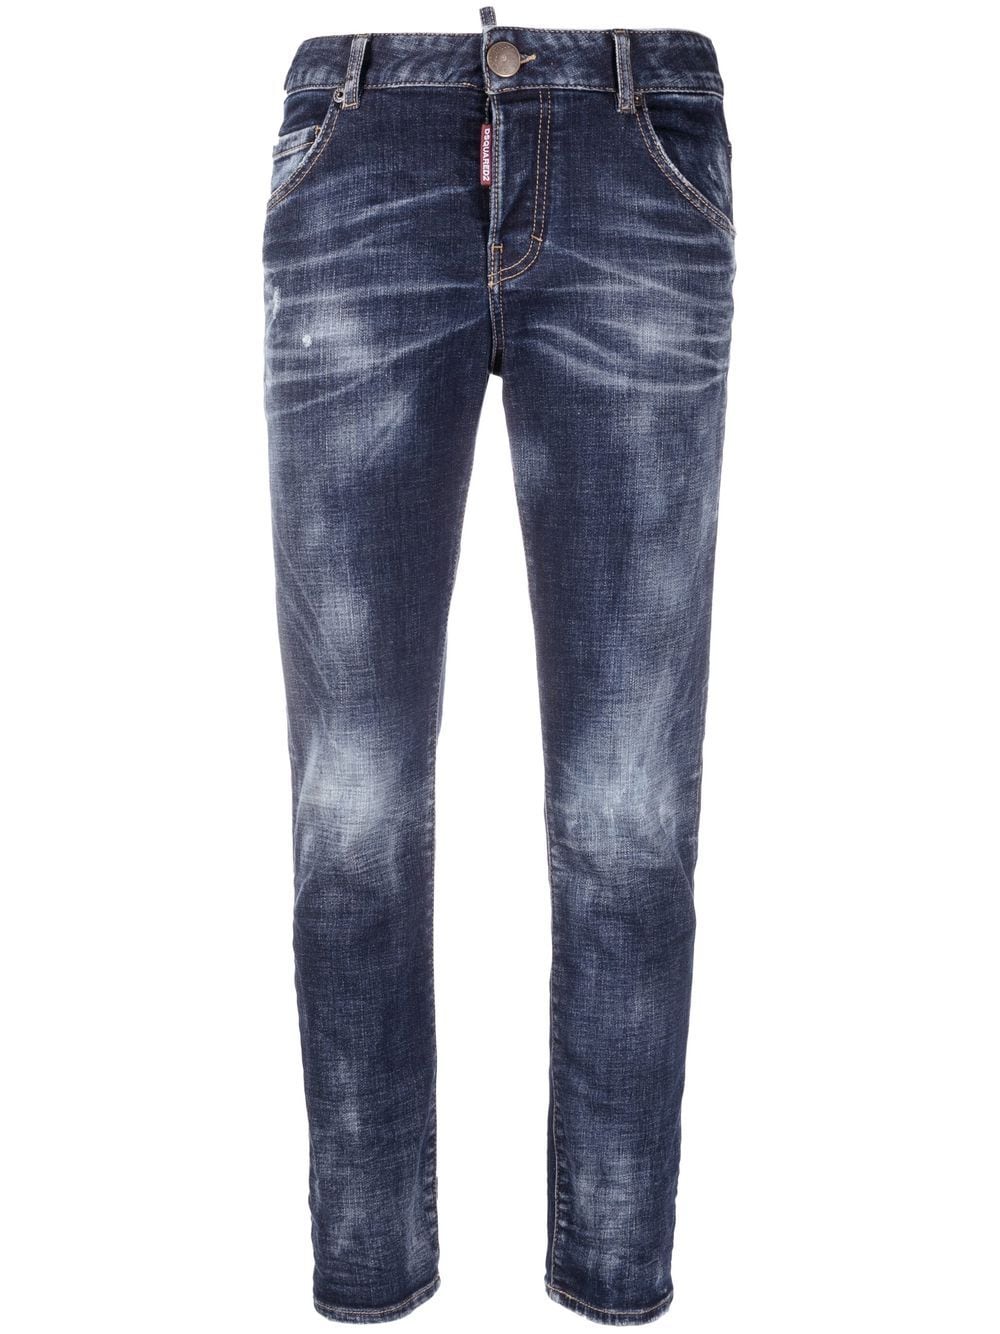 DSQUARED2 bleached-effect skinny jeans - Blue von DSQUARED2